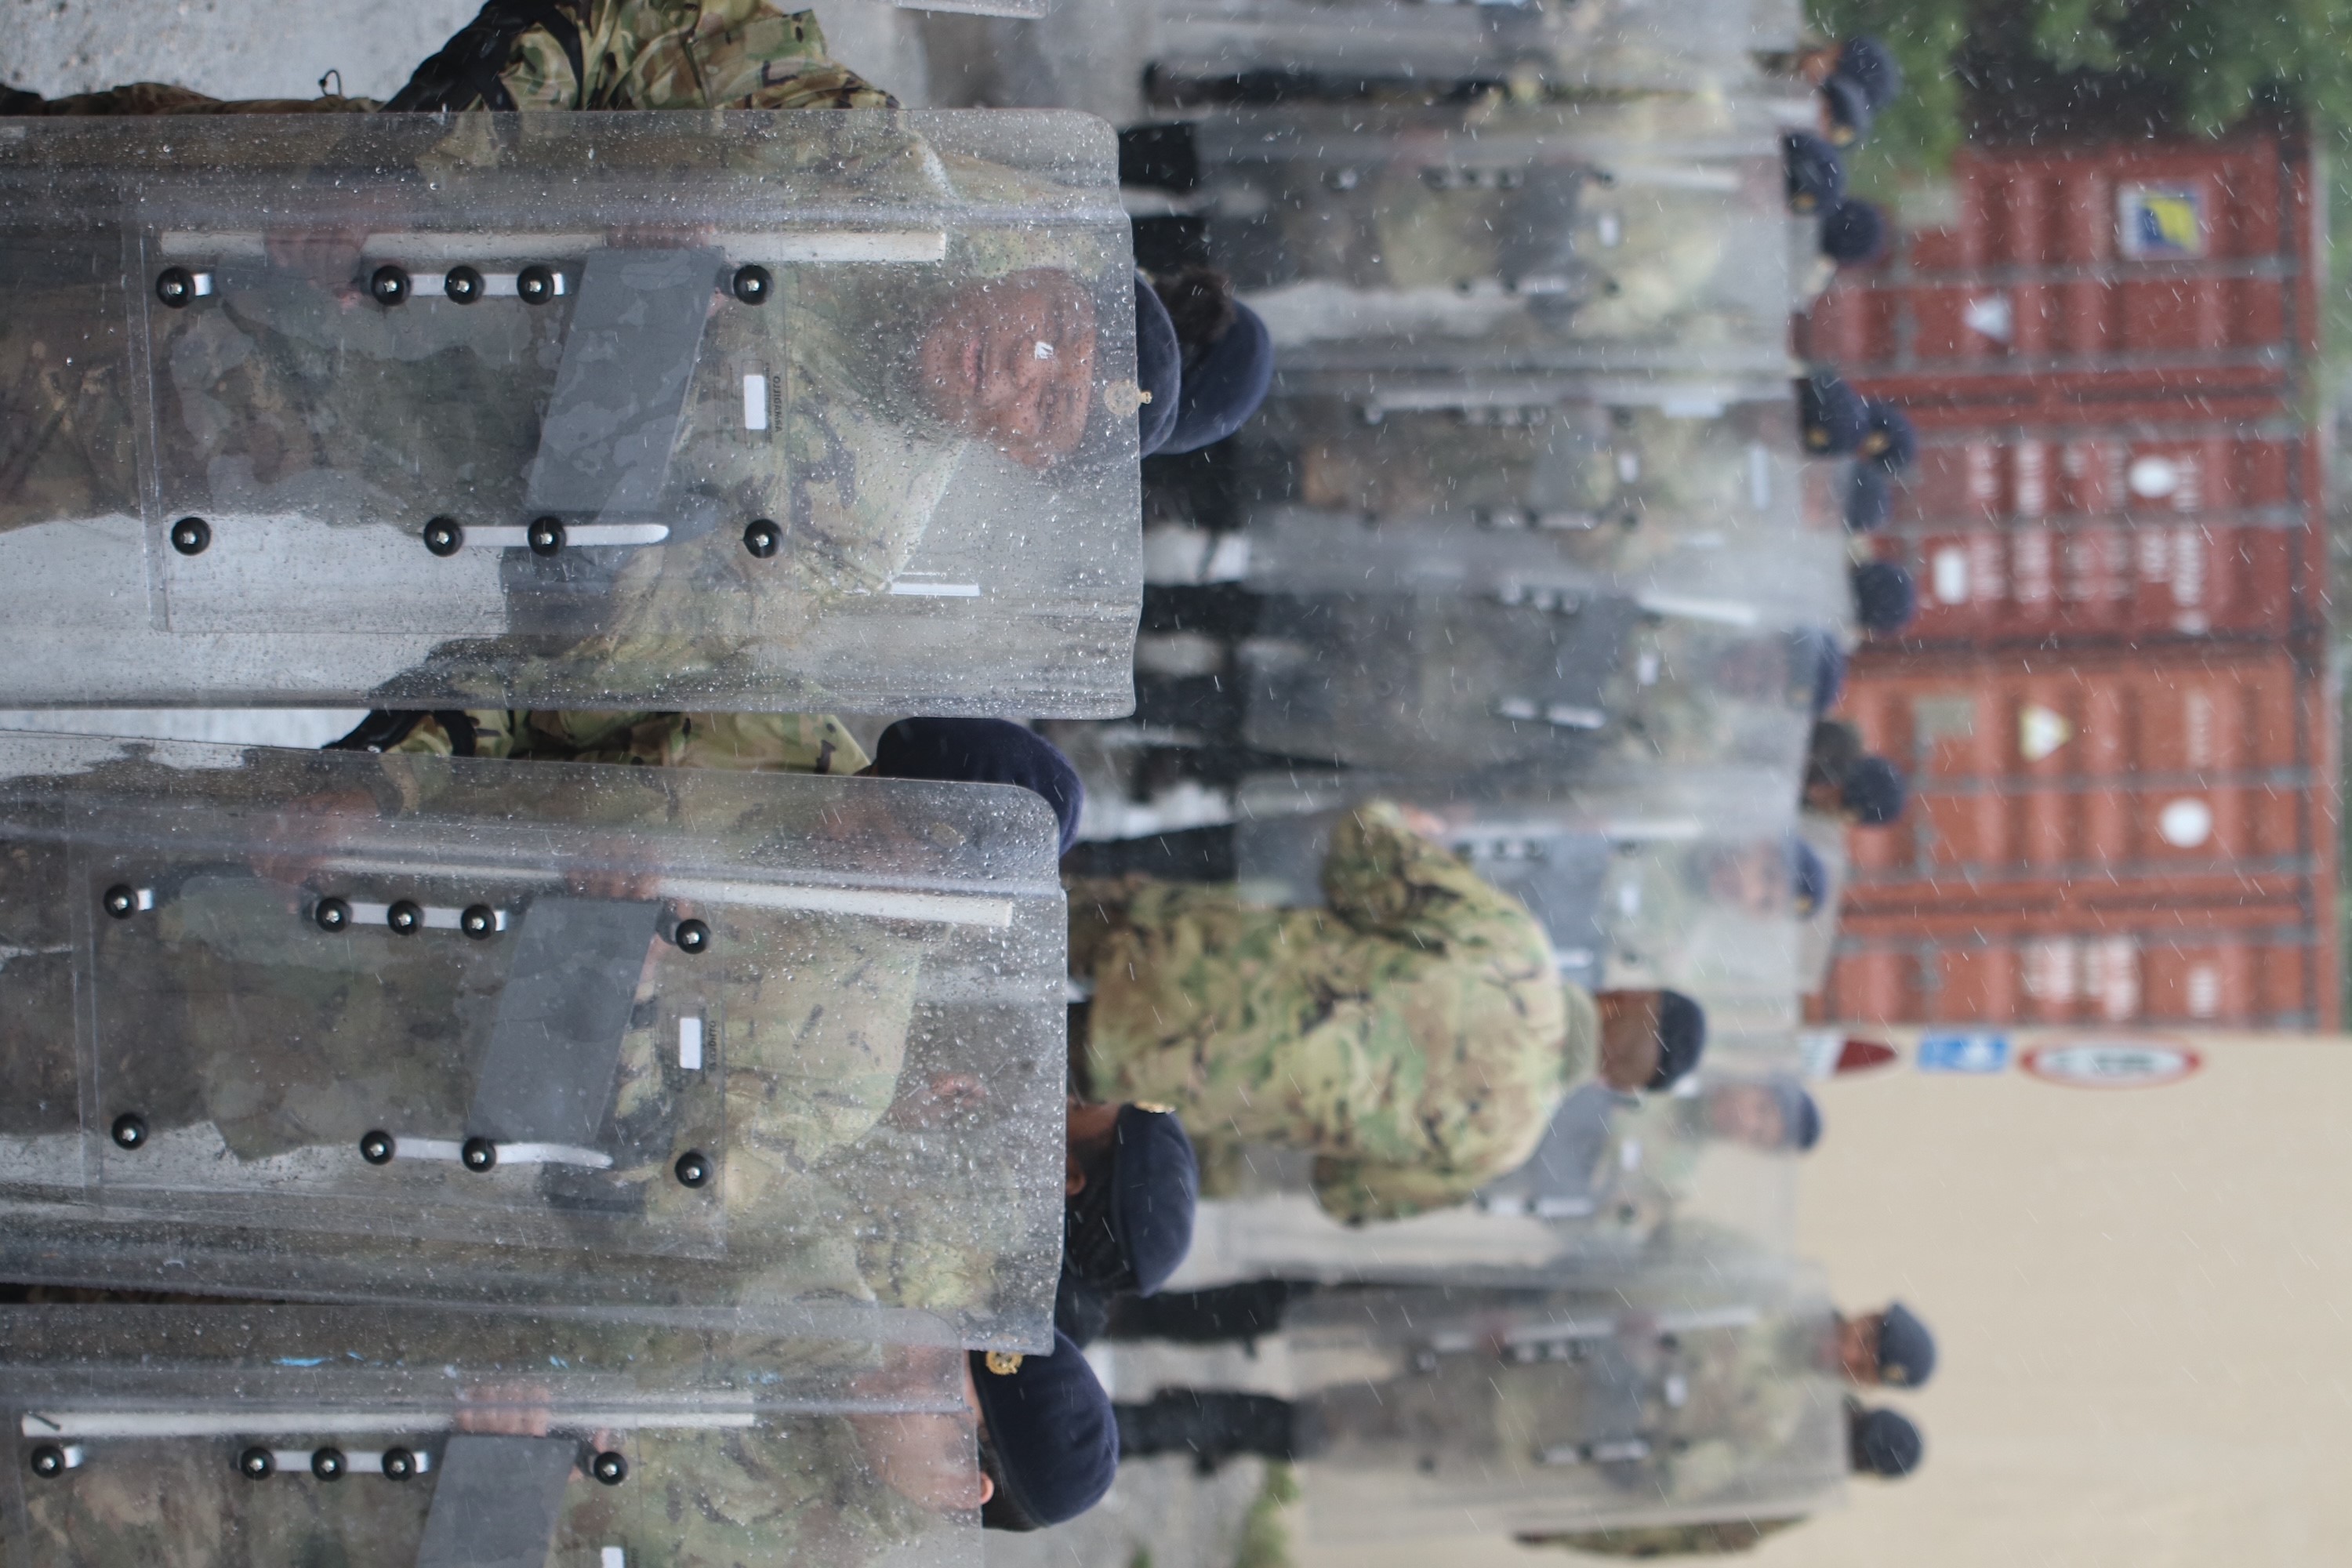 02 Soldiers from B Company Commenced Public Order Training